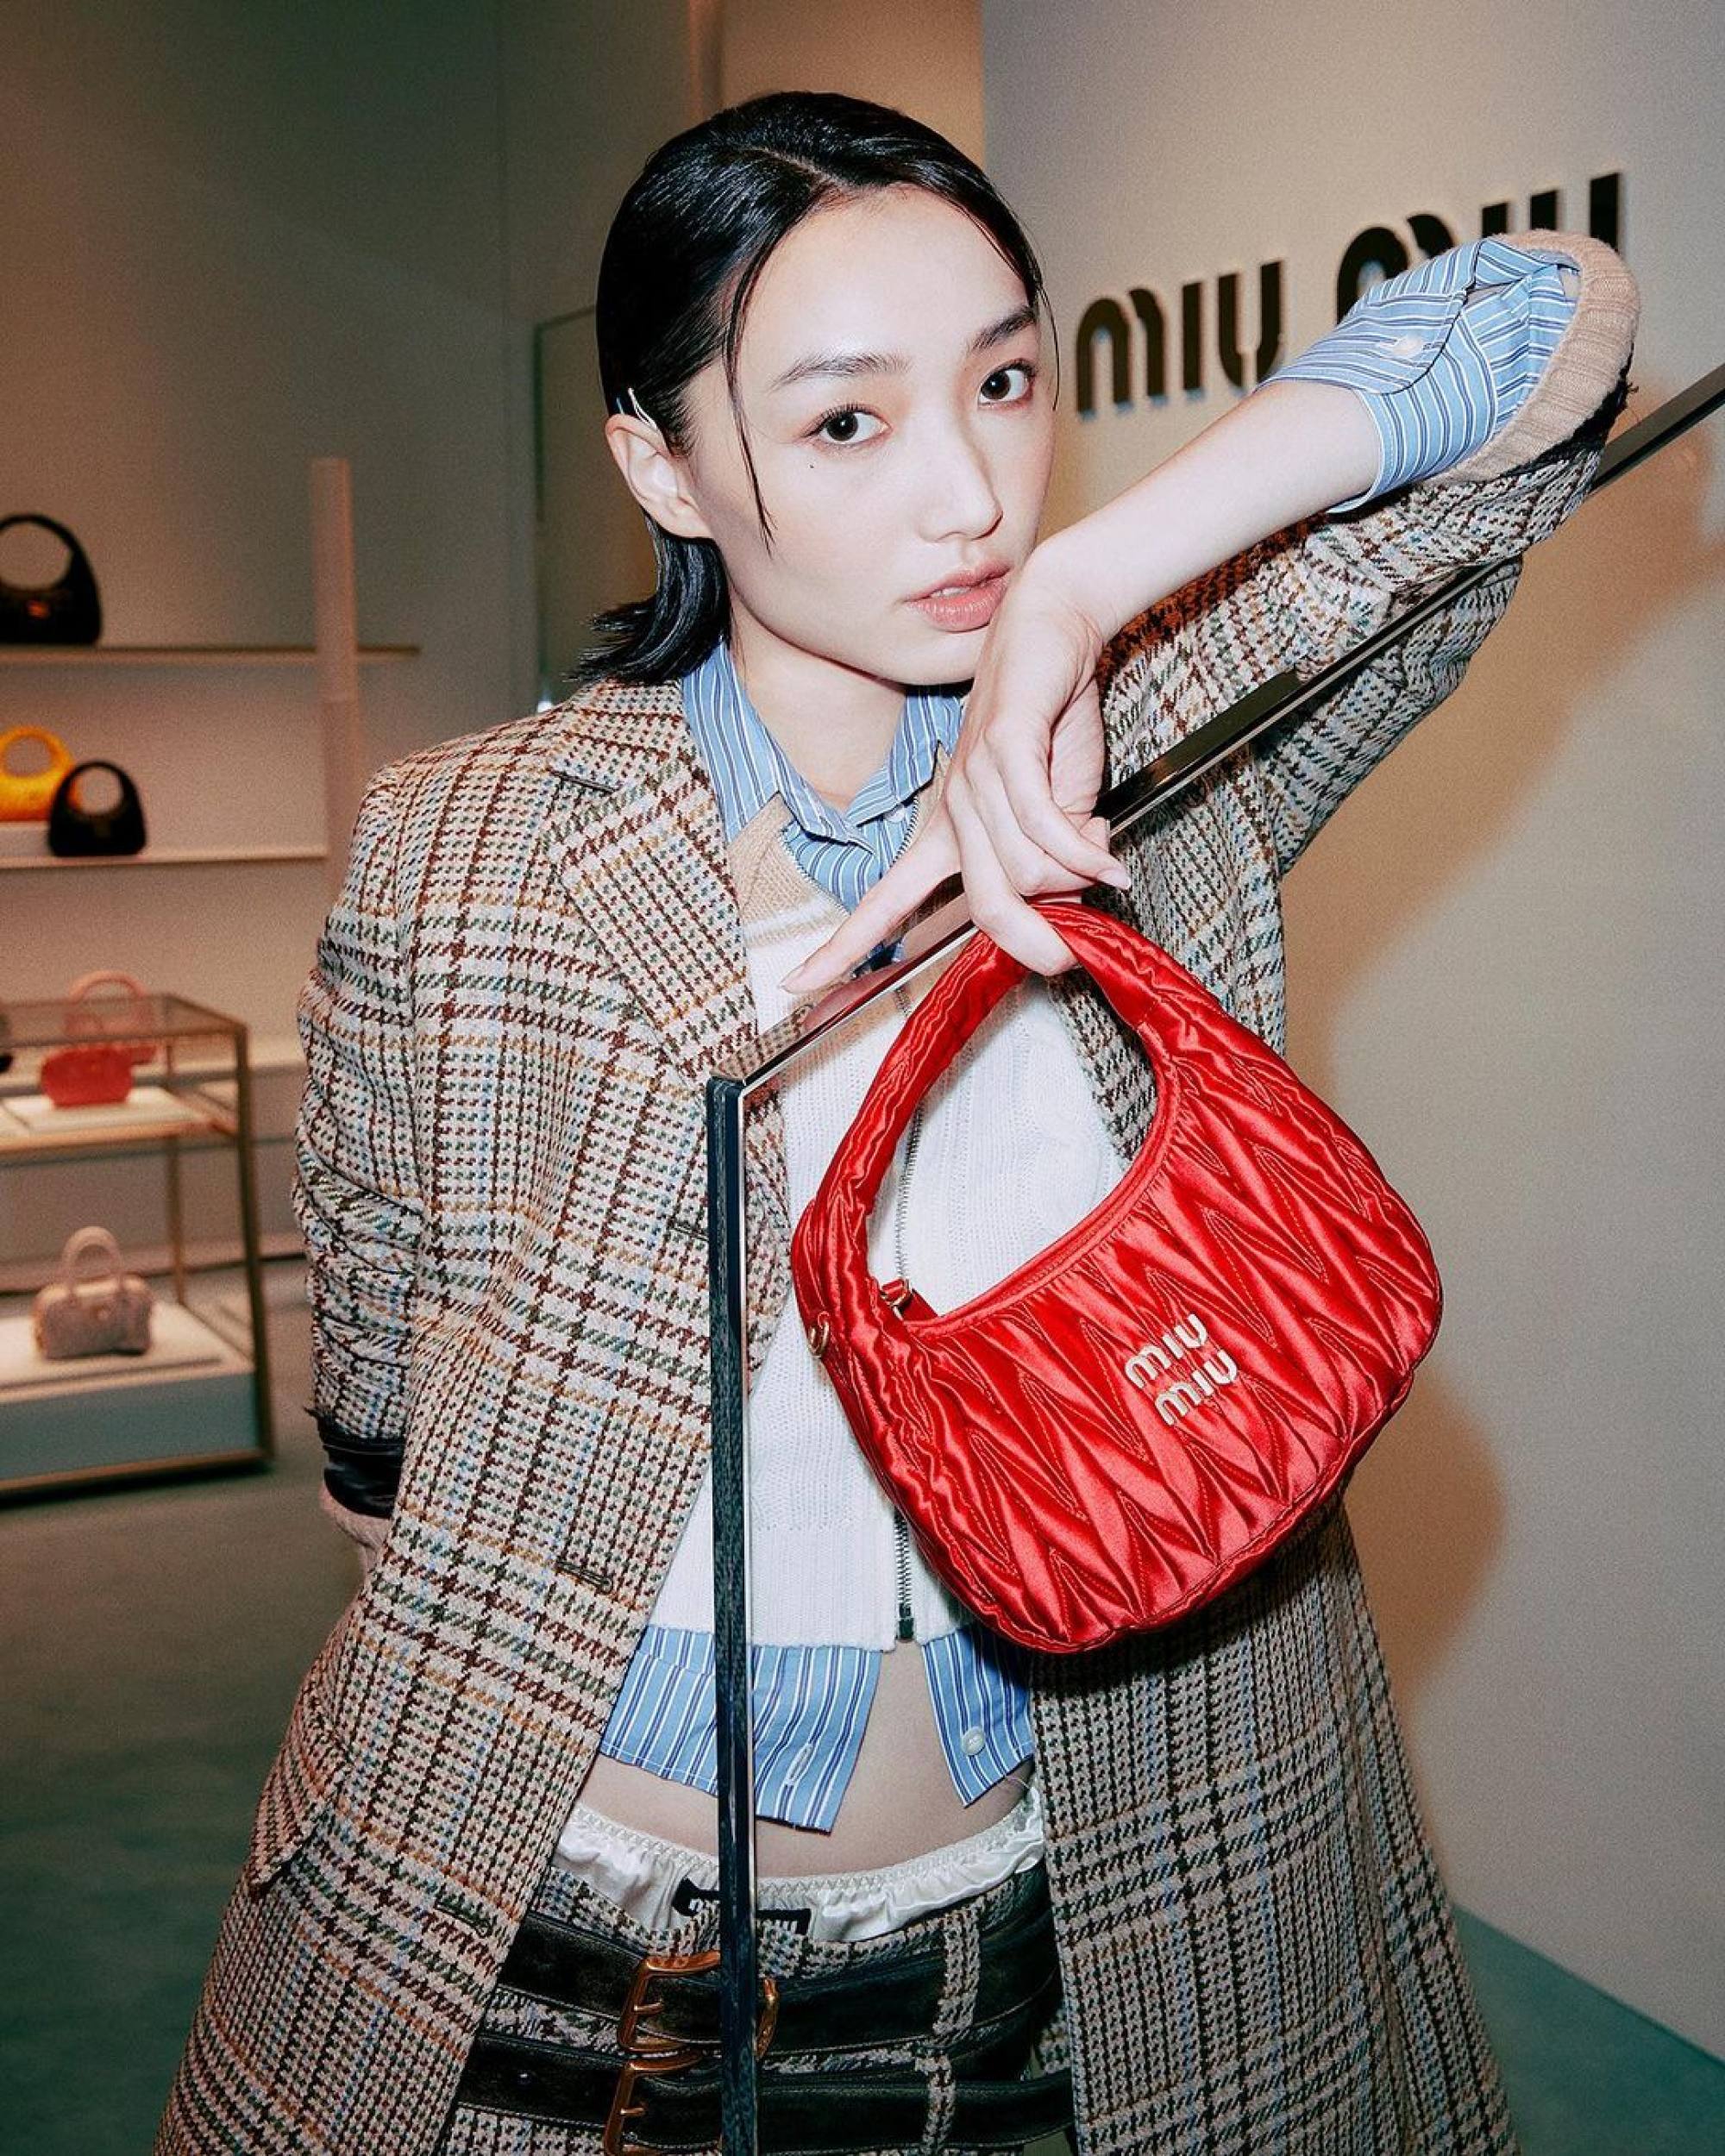 Louis Vuitton bags reworked by Hong Kong-based designer with